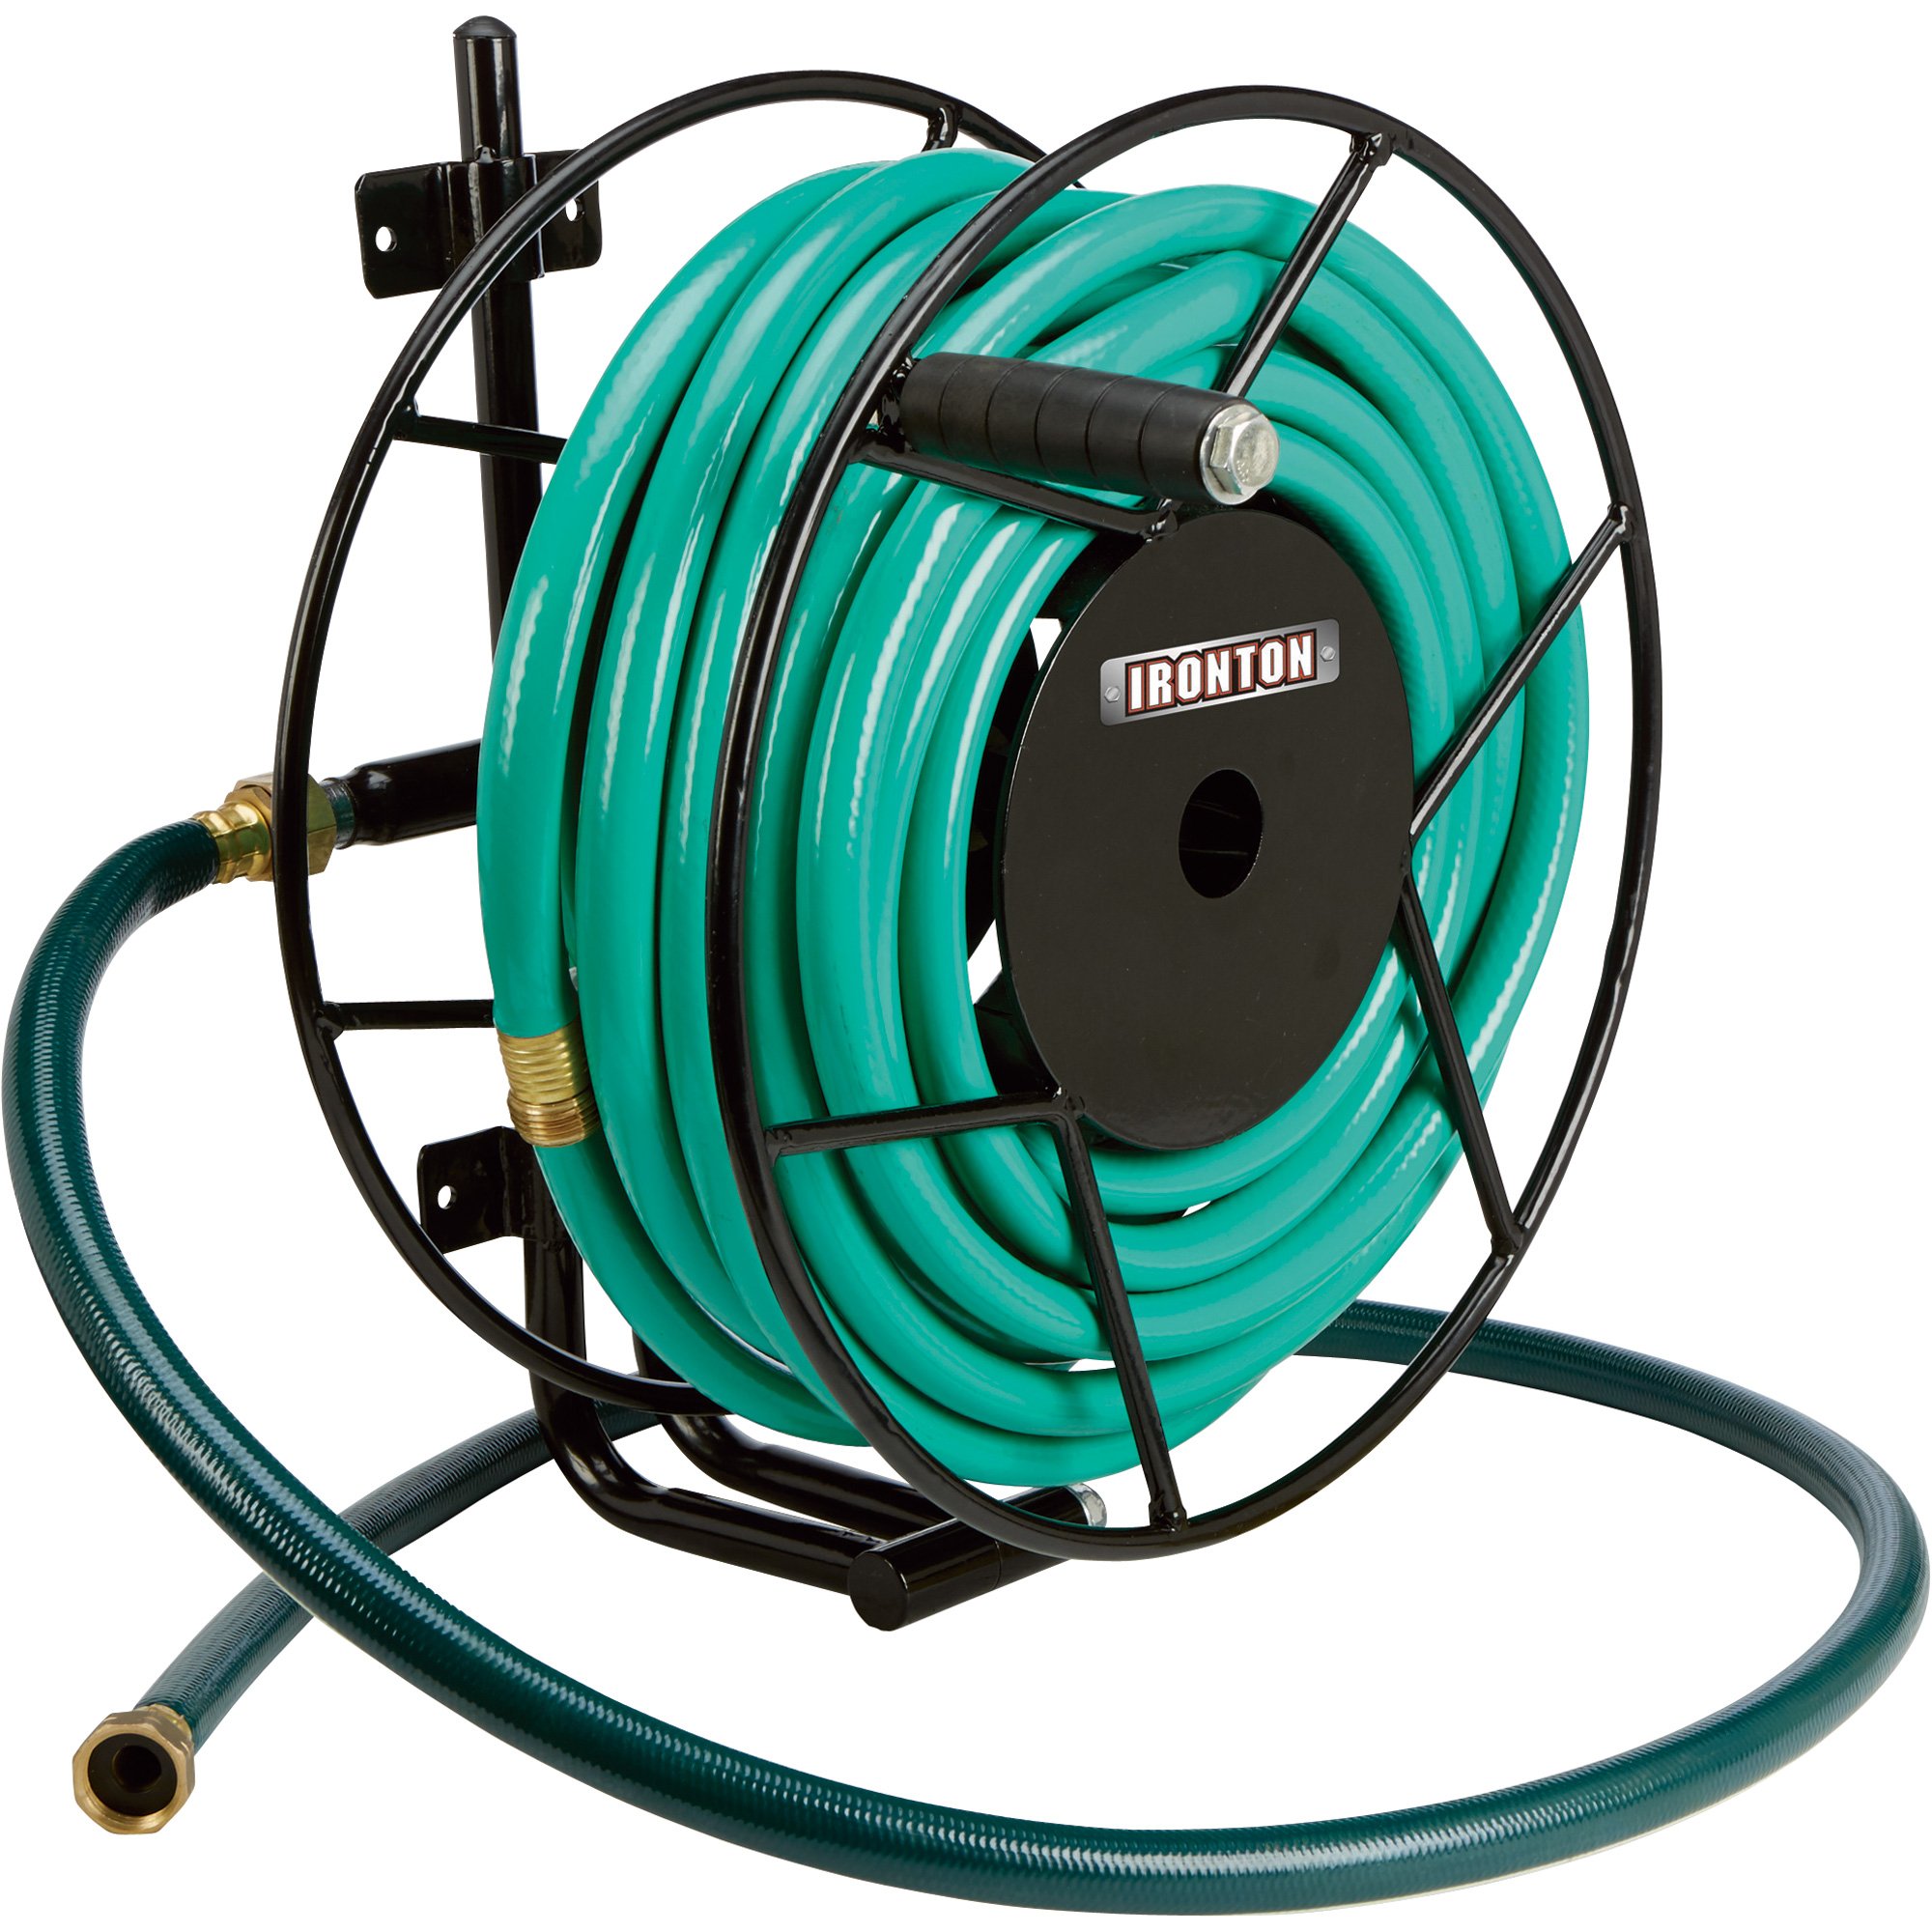 Ironton Wall-Mount Garden Hose Reel — Holds 5/8in. X 100ft. Hose